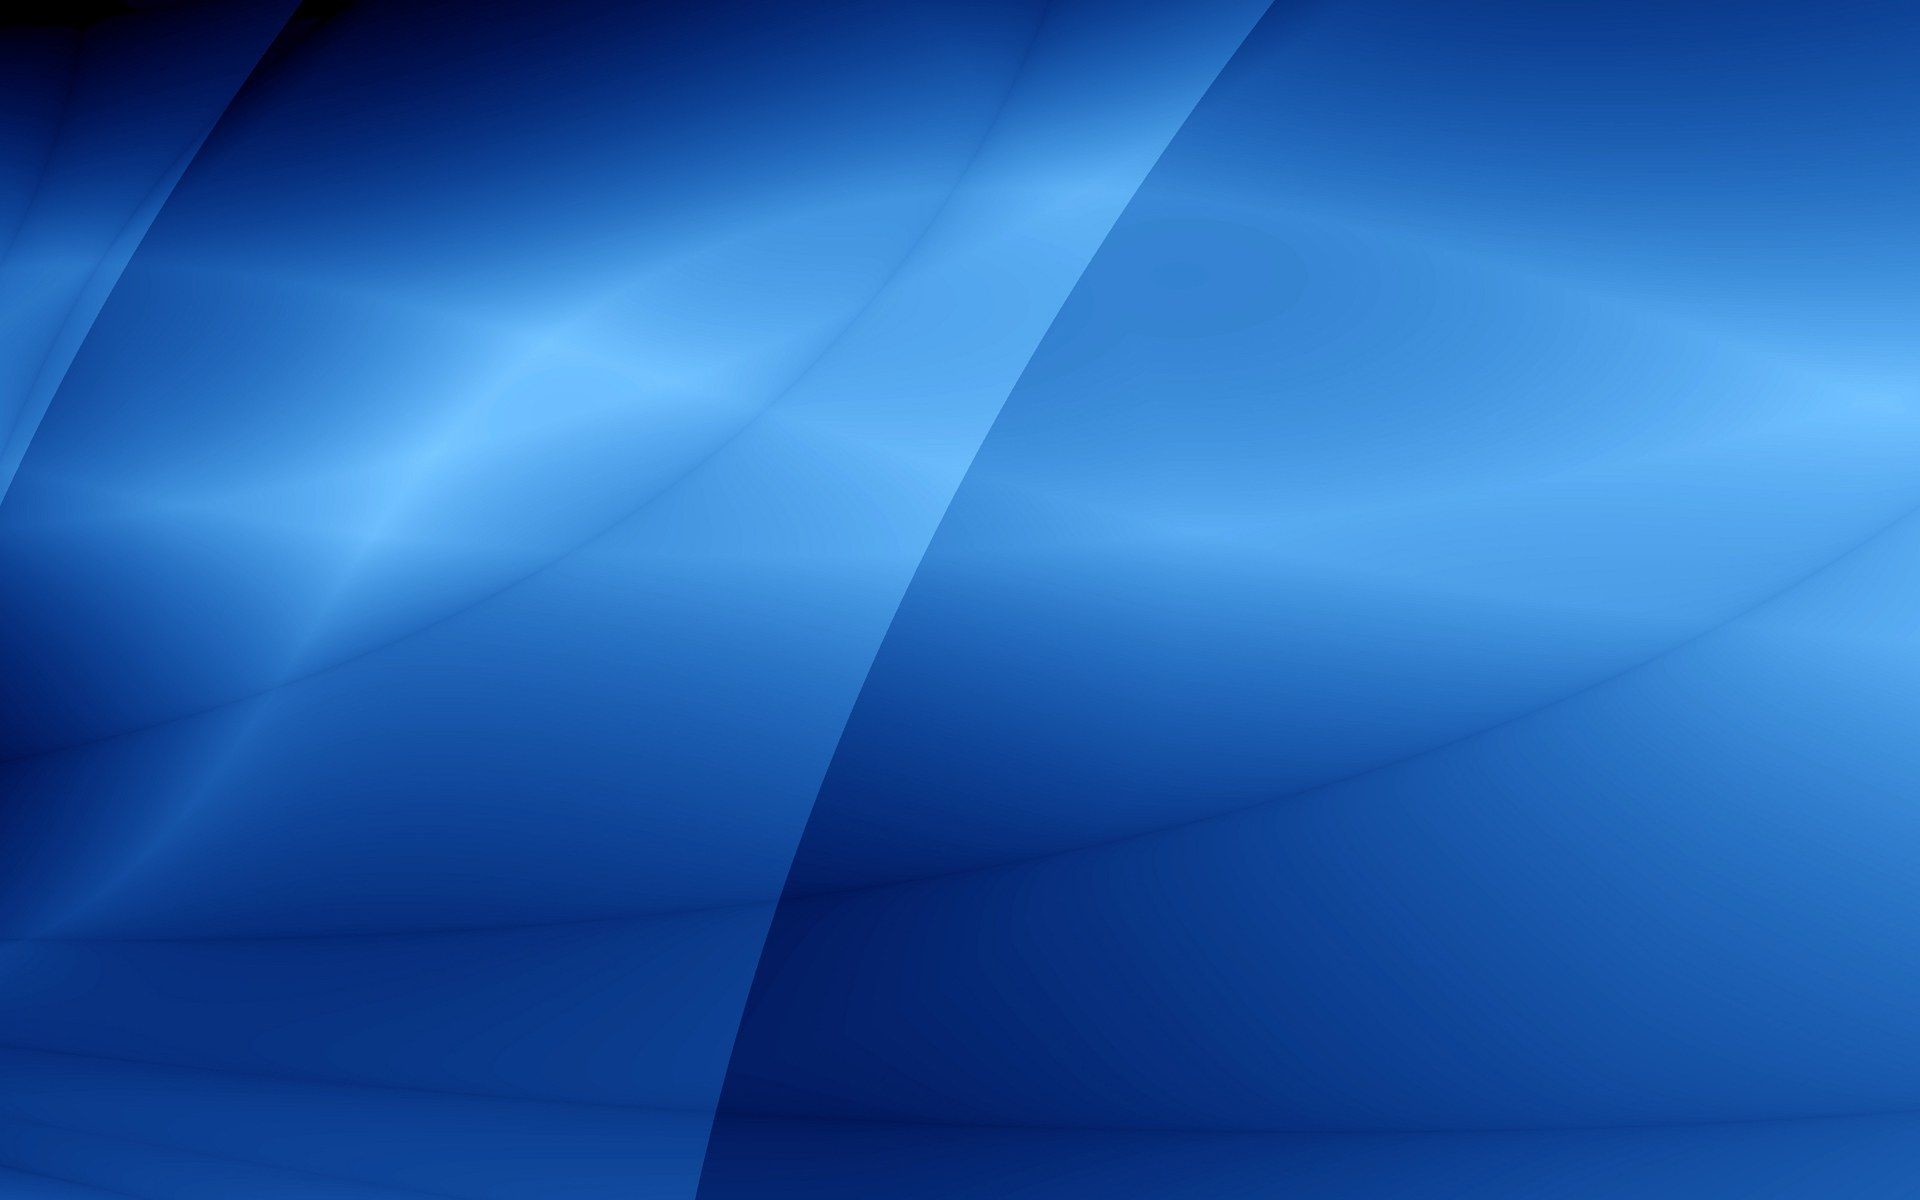 1920x1200 Blue Abstract Background 2042 Hd Wallpapers in Abstract - Imagesci.com